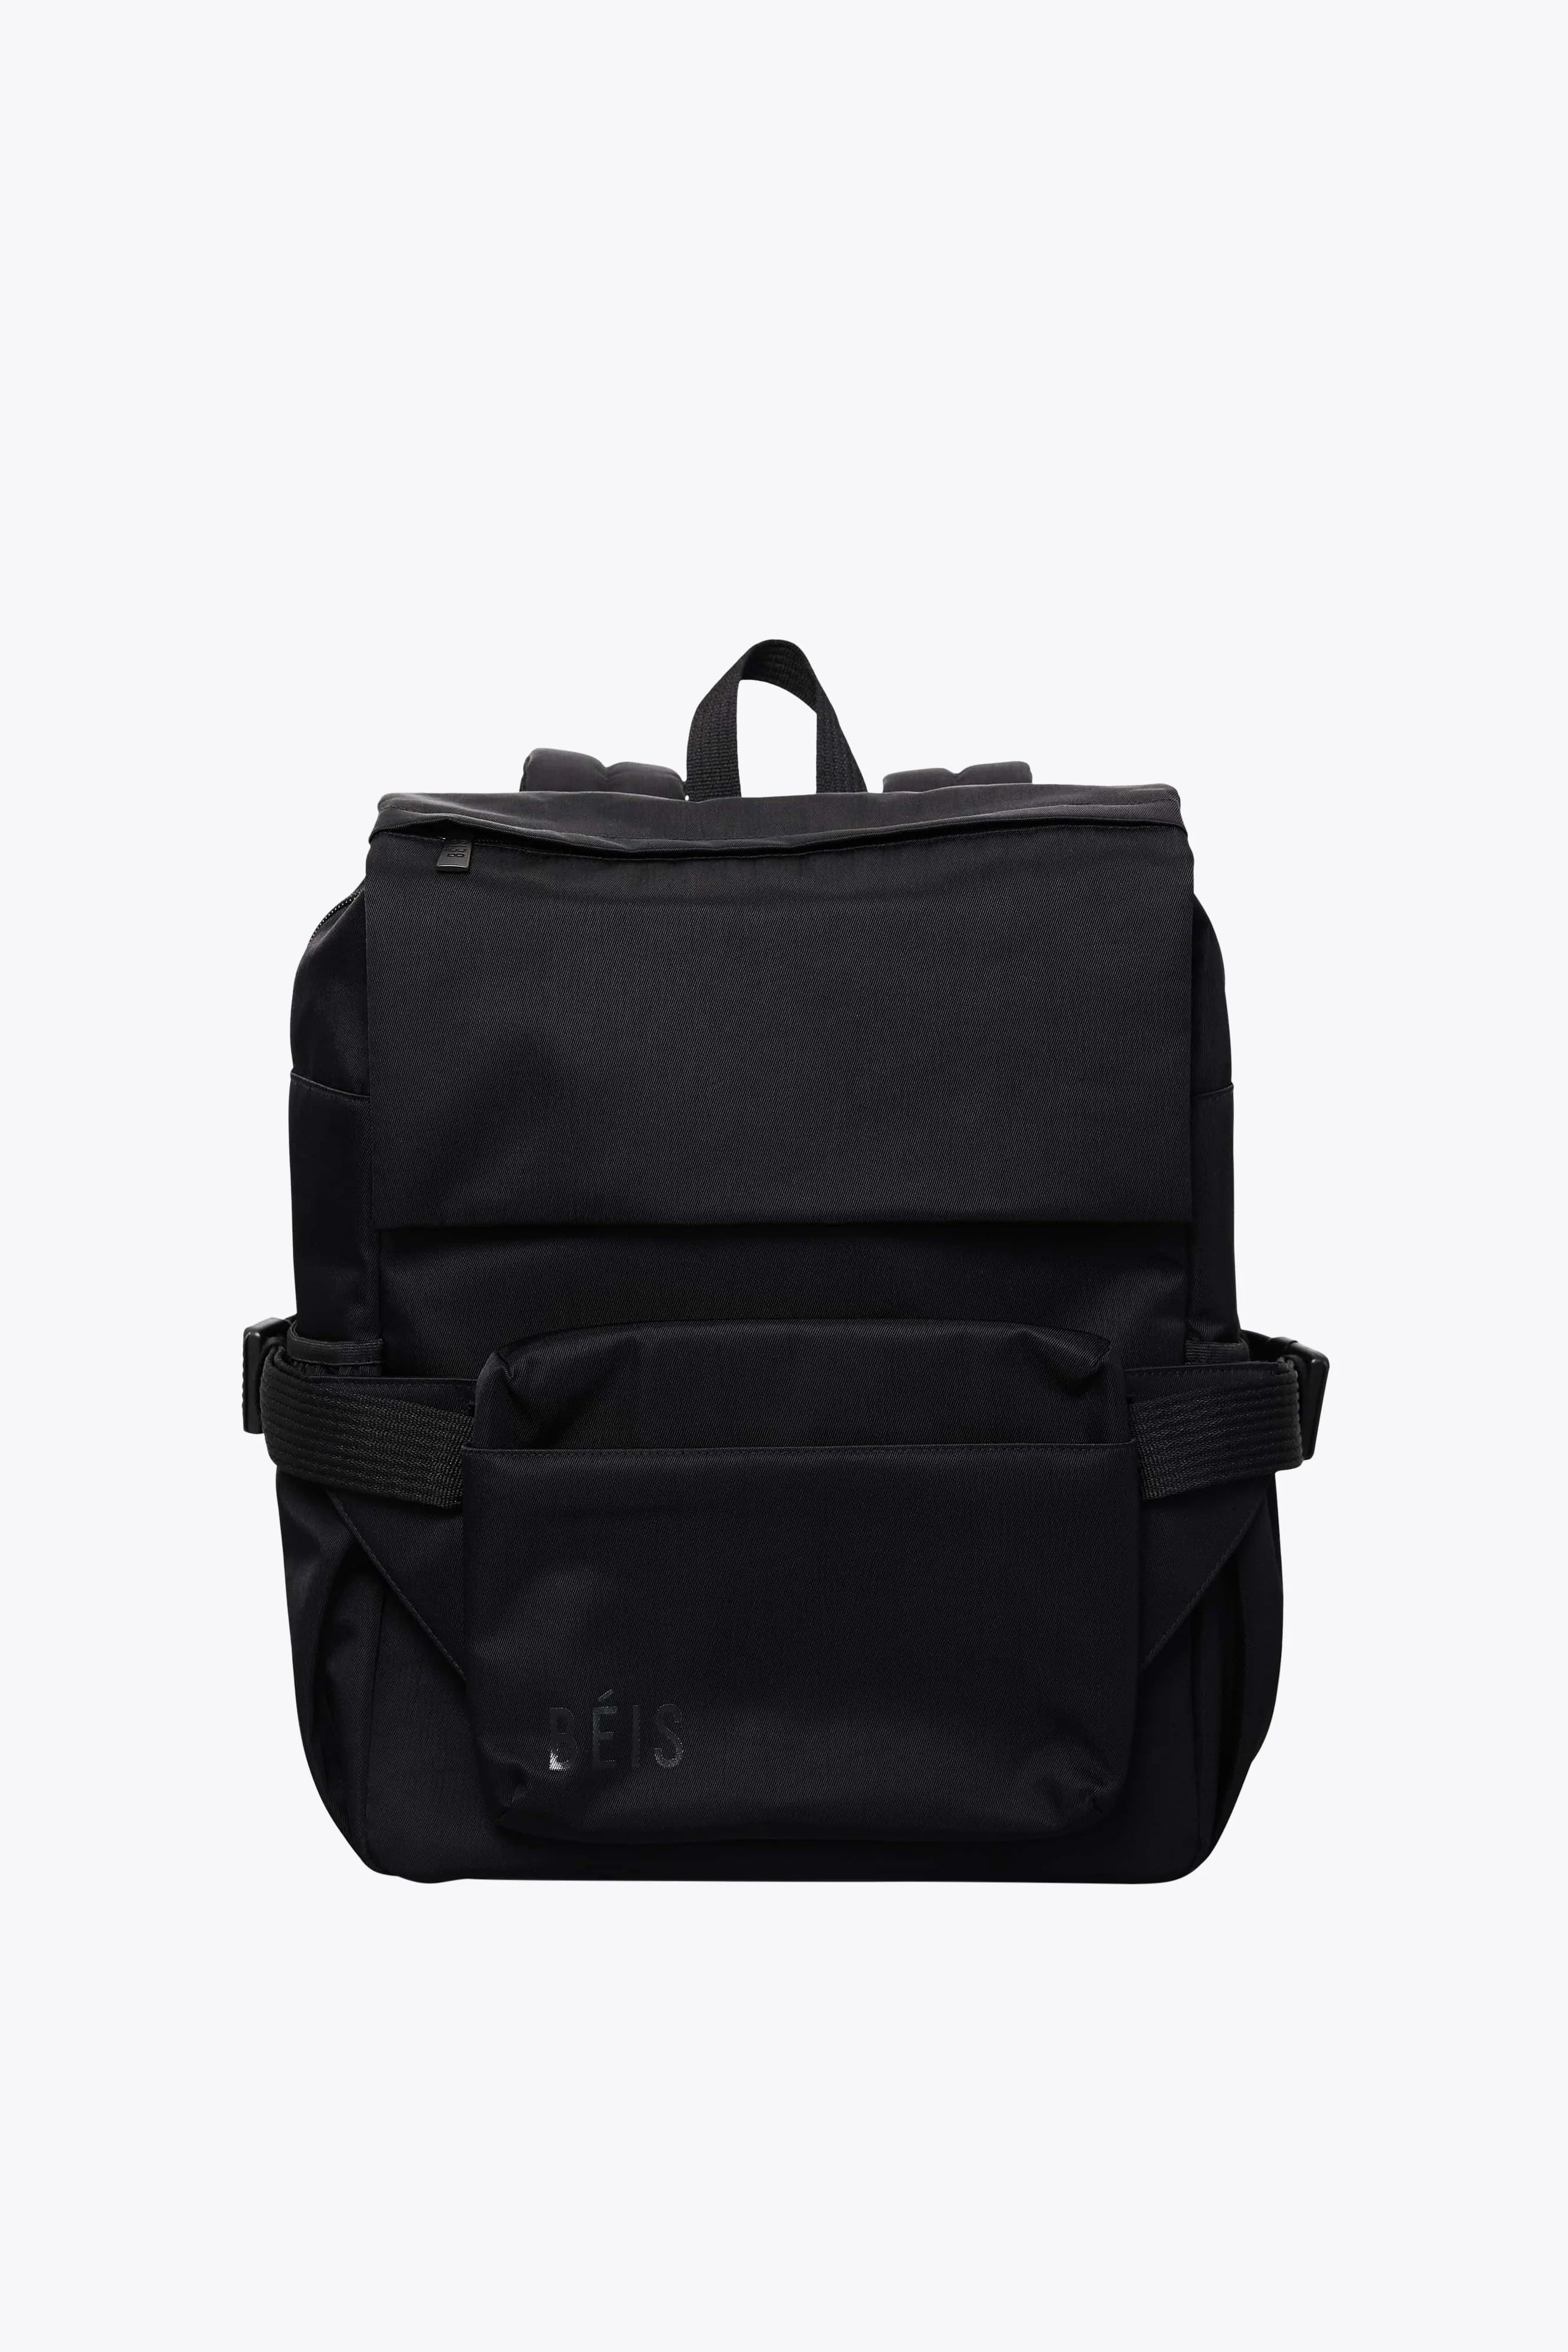 The Ultimate Diaper Backpack in Black | BÉIS Travel